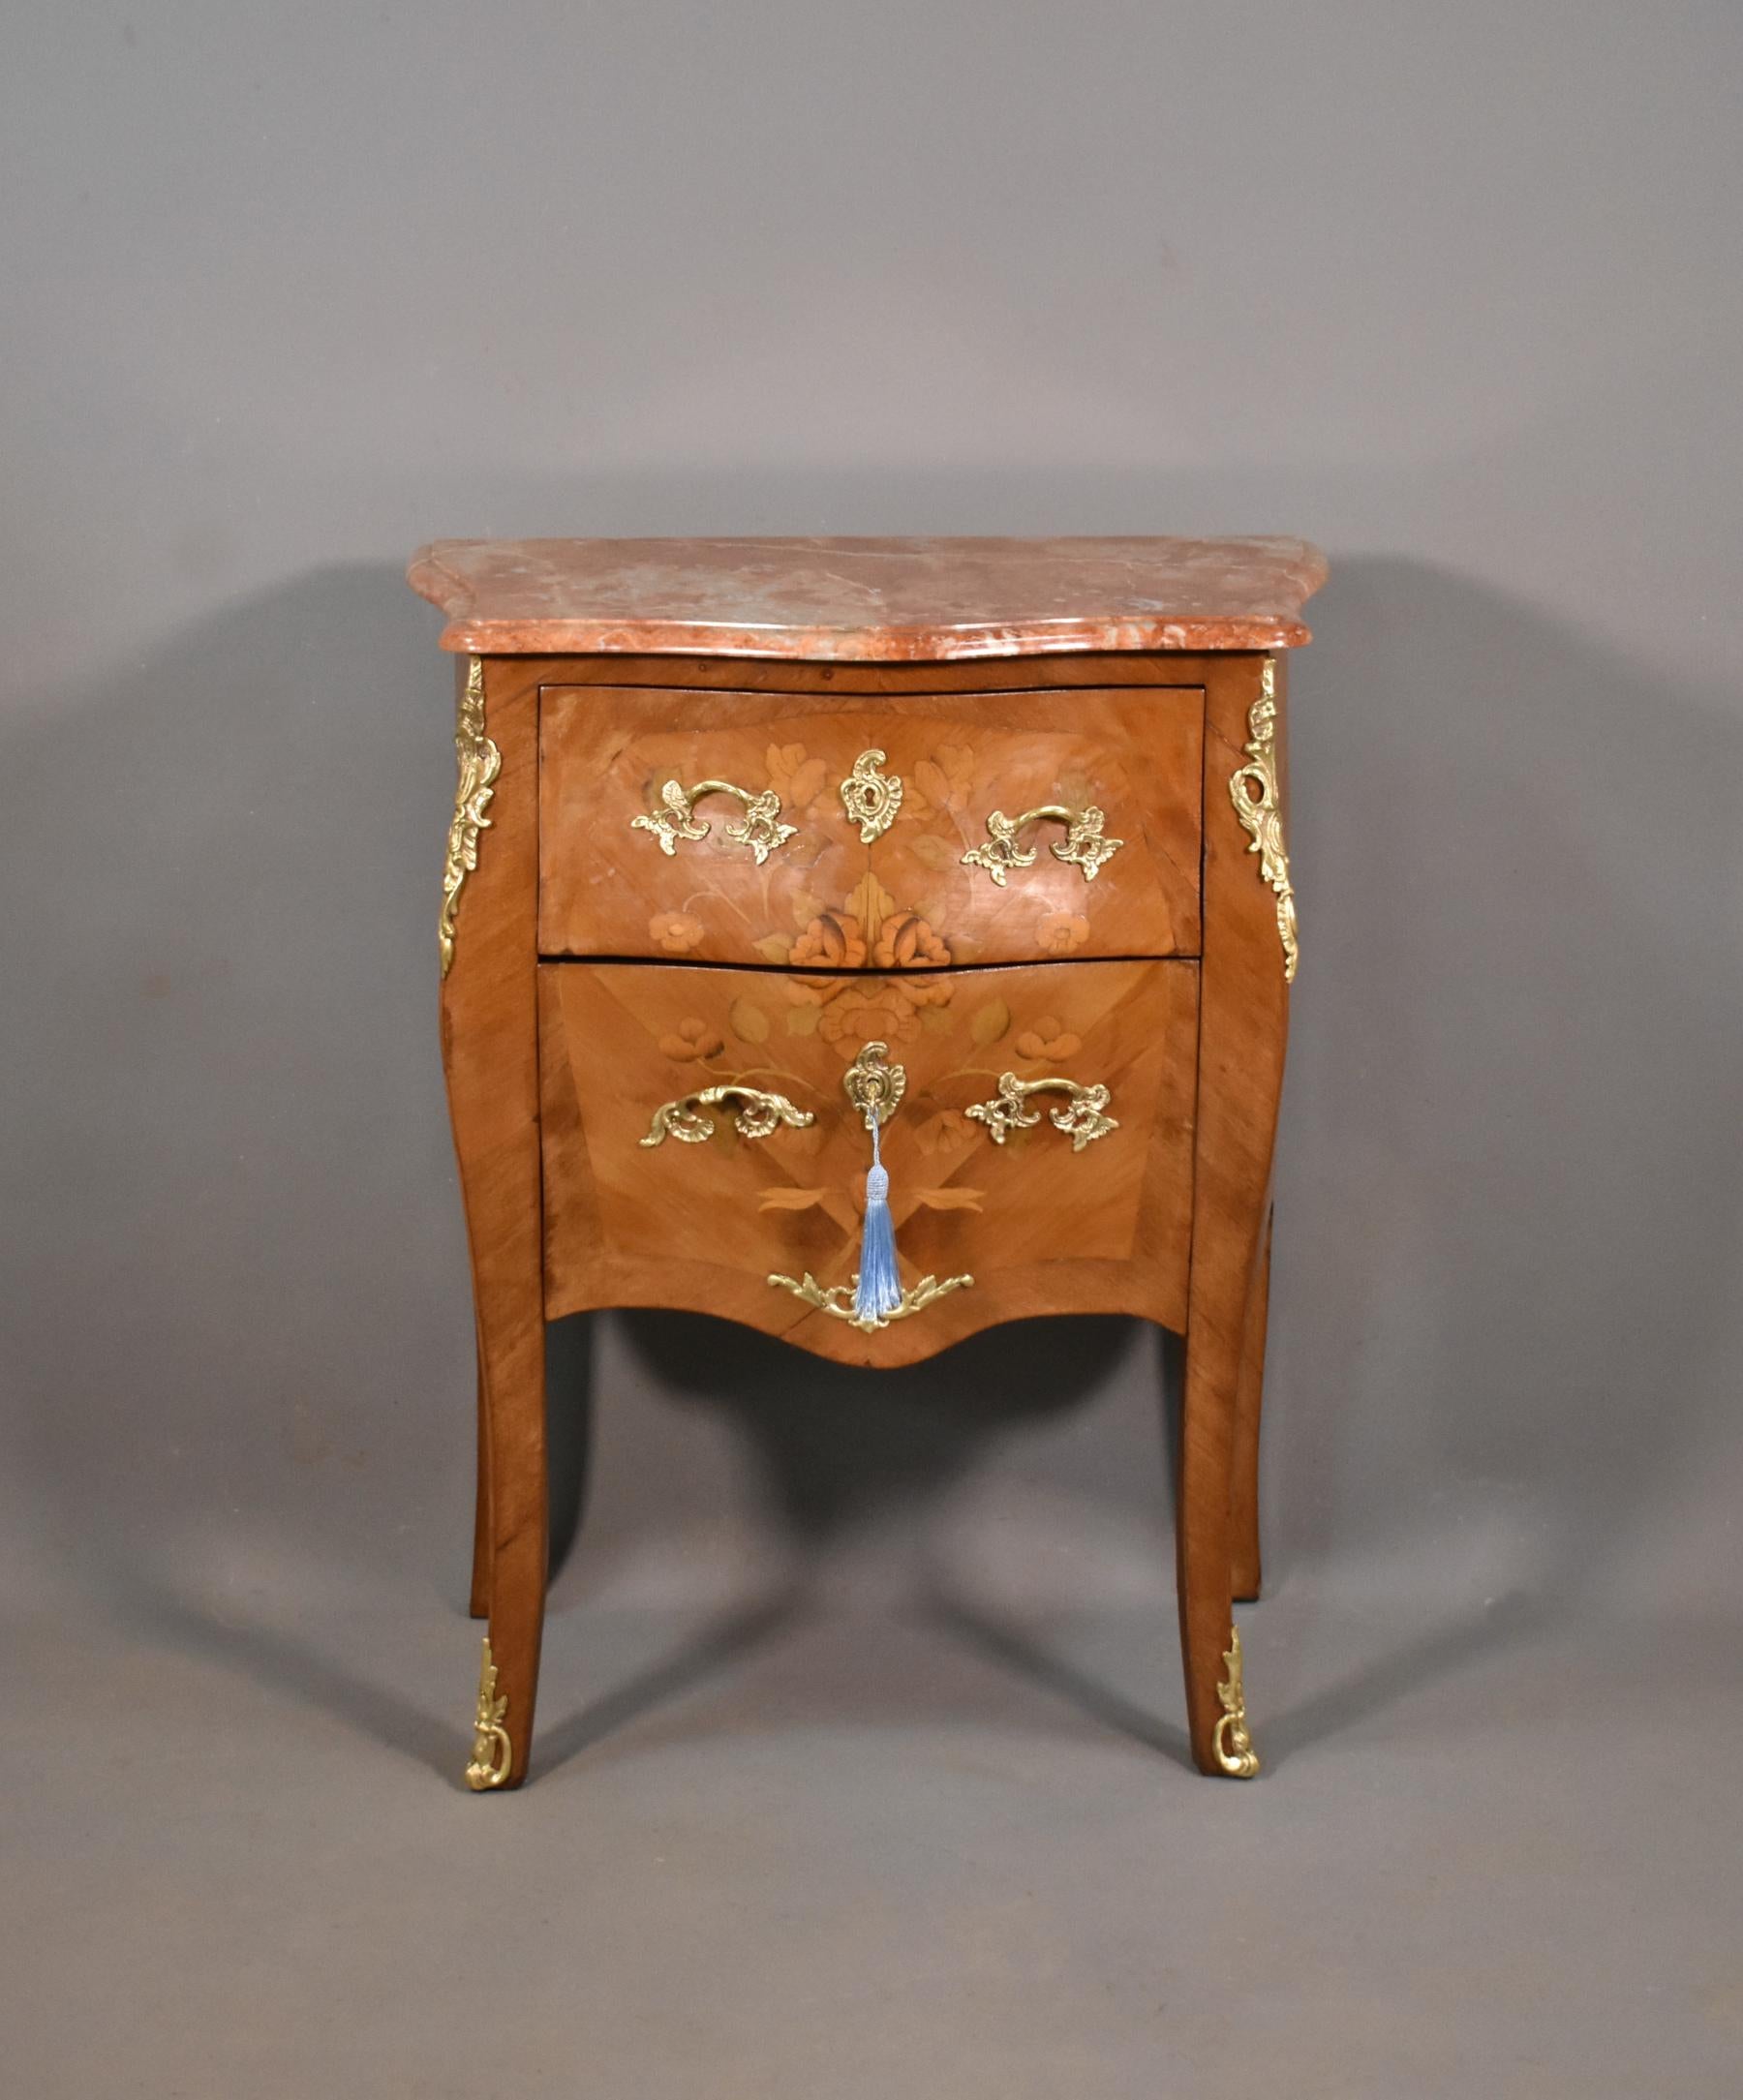 Beveled Antique French Louis XV Revival Marquetry Bombe Commode 19C For Sale